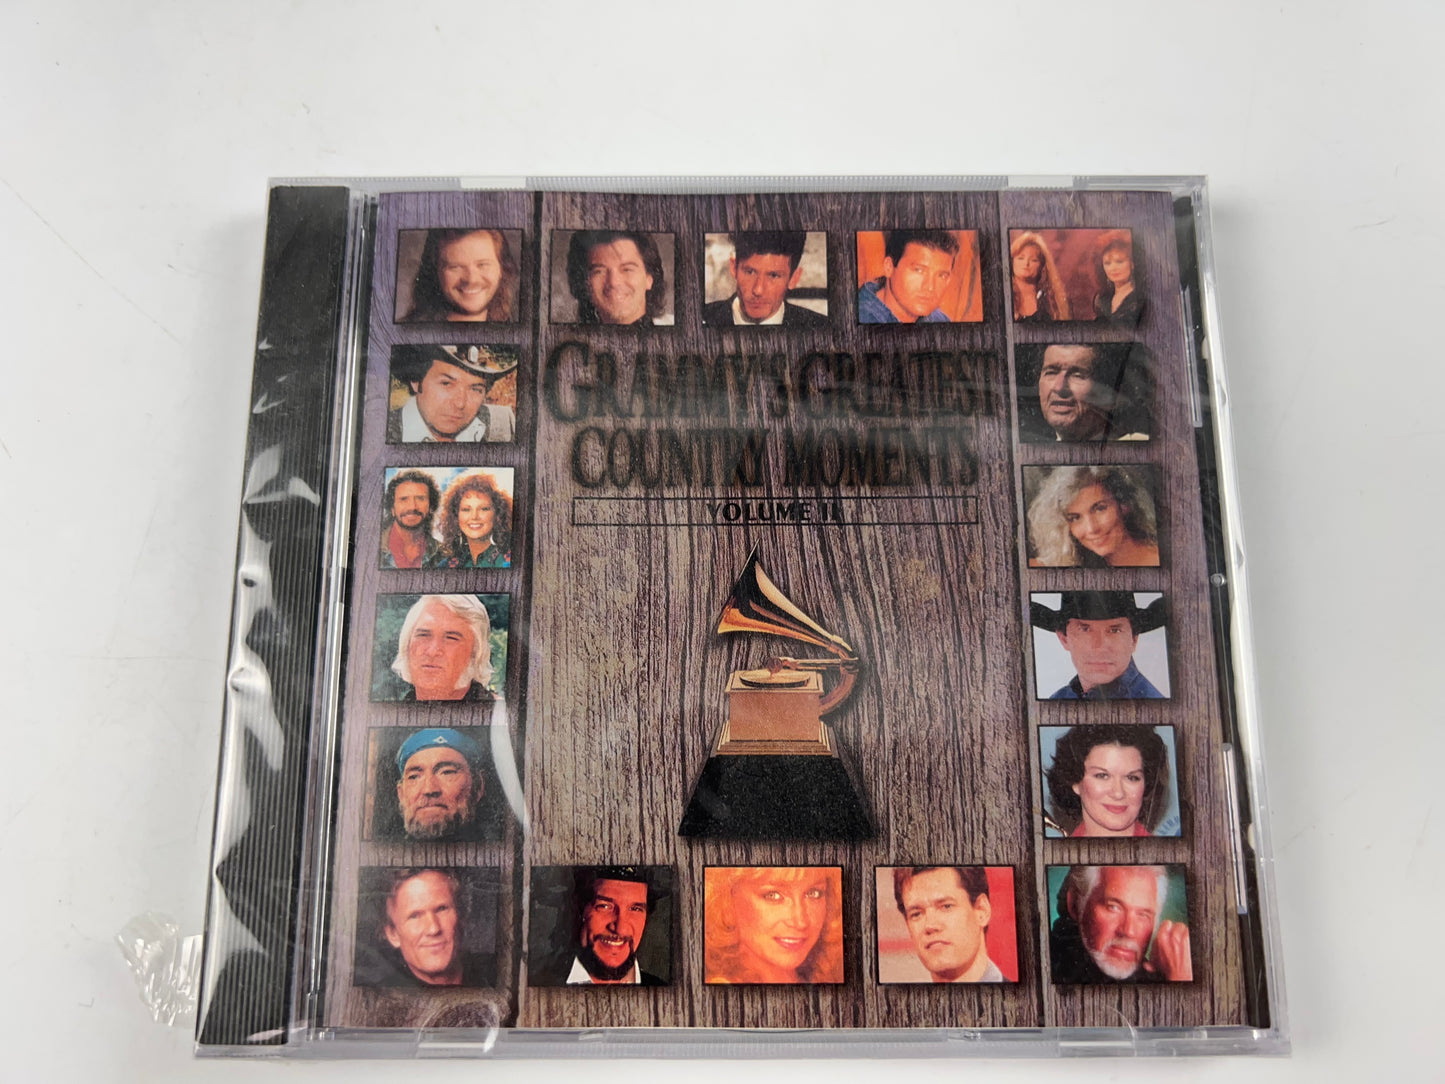 Grammys Greatest Country moments Vol 2 Various Artists CD ATLANTIC